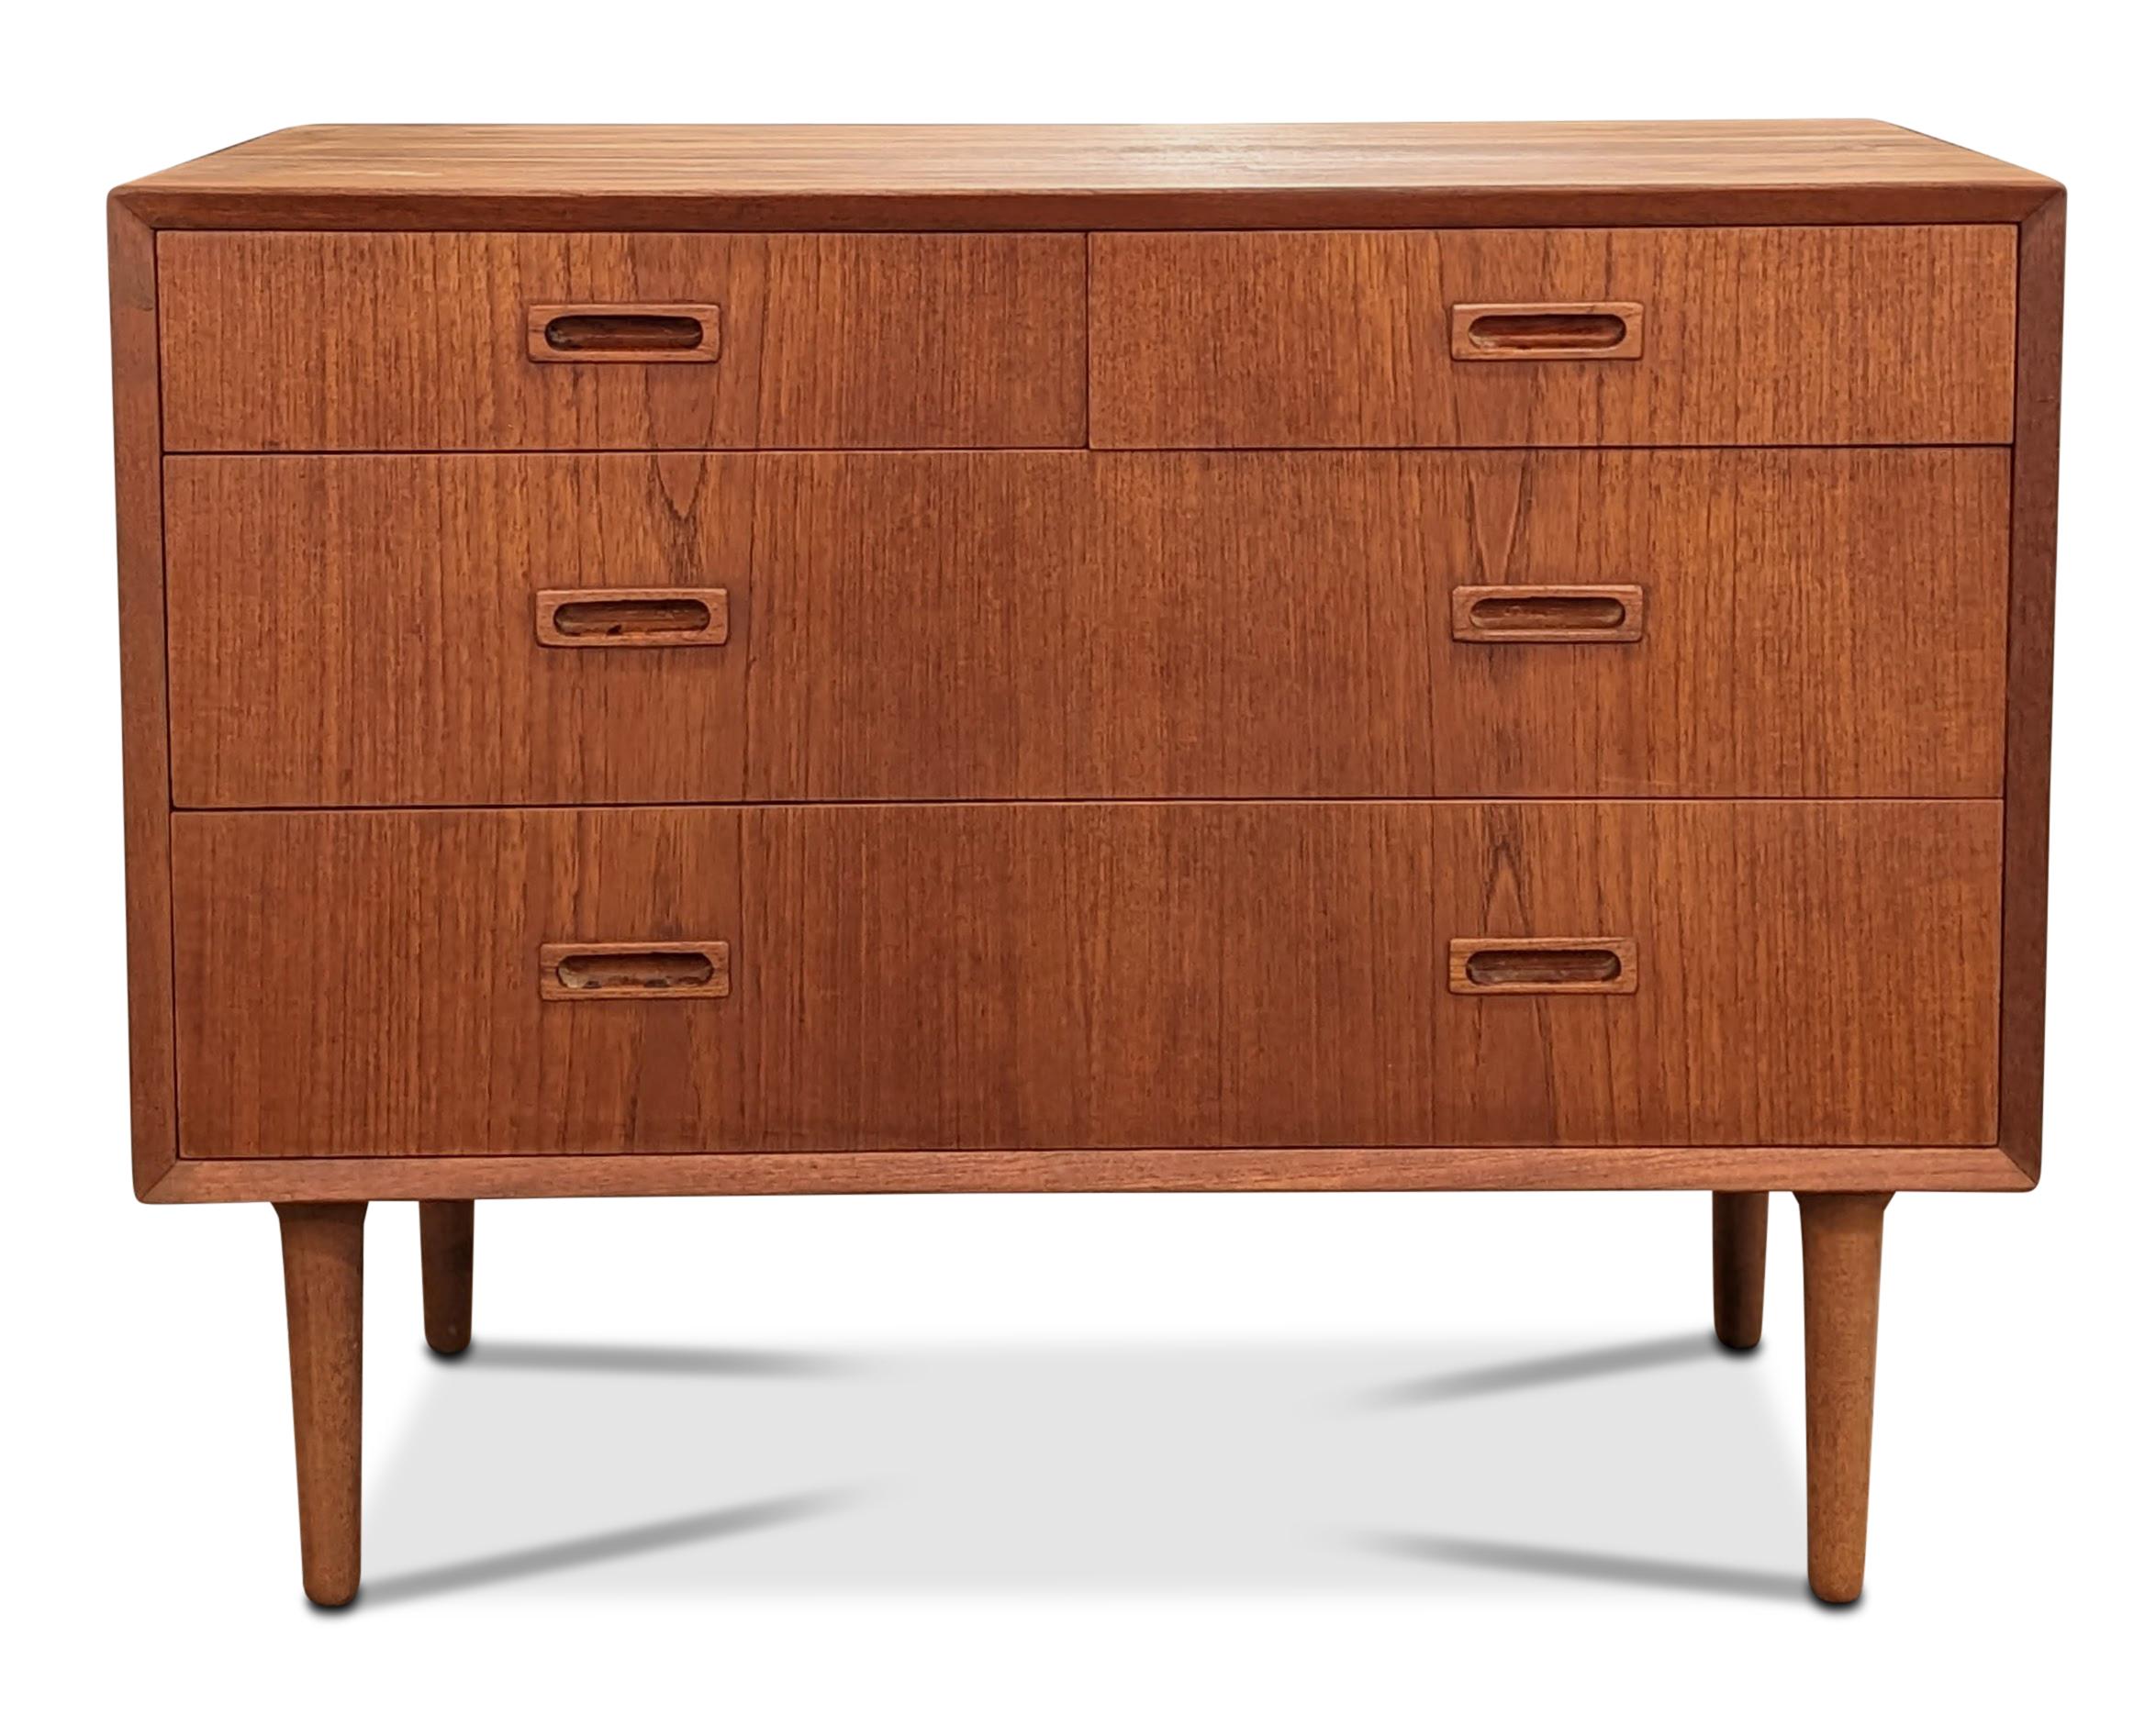 Vintage Danish Mid-Century Modern, made in the 1950s - recently refurbished.

These pieces are more than 65+ years old and some wear and tear can be expected, but we do everything we can to refurbish them in respect to the design.

There is a